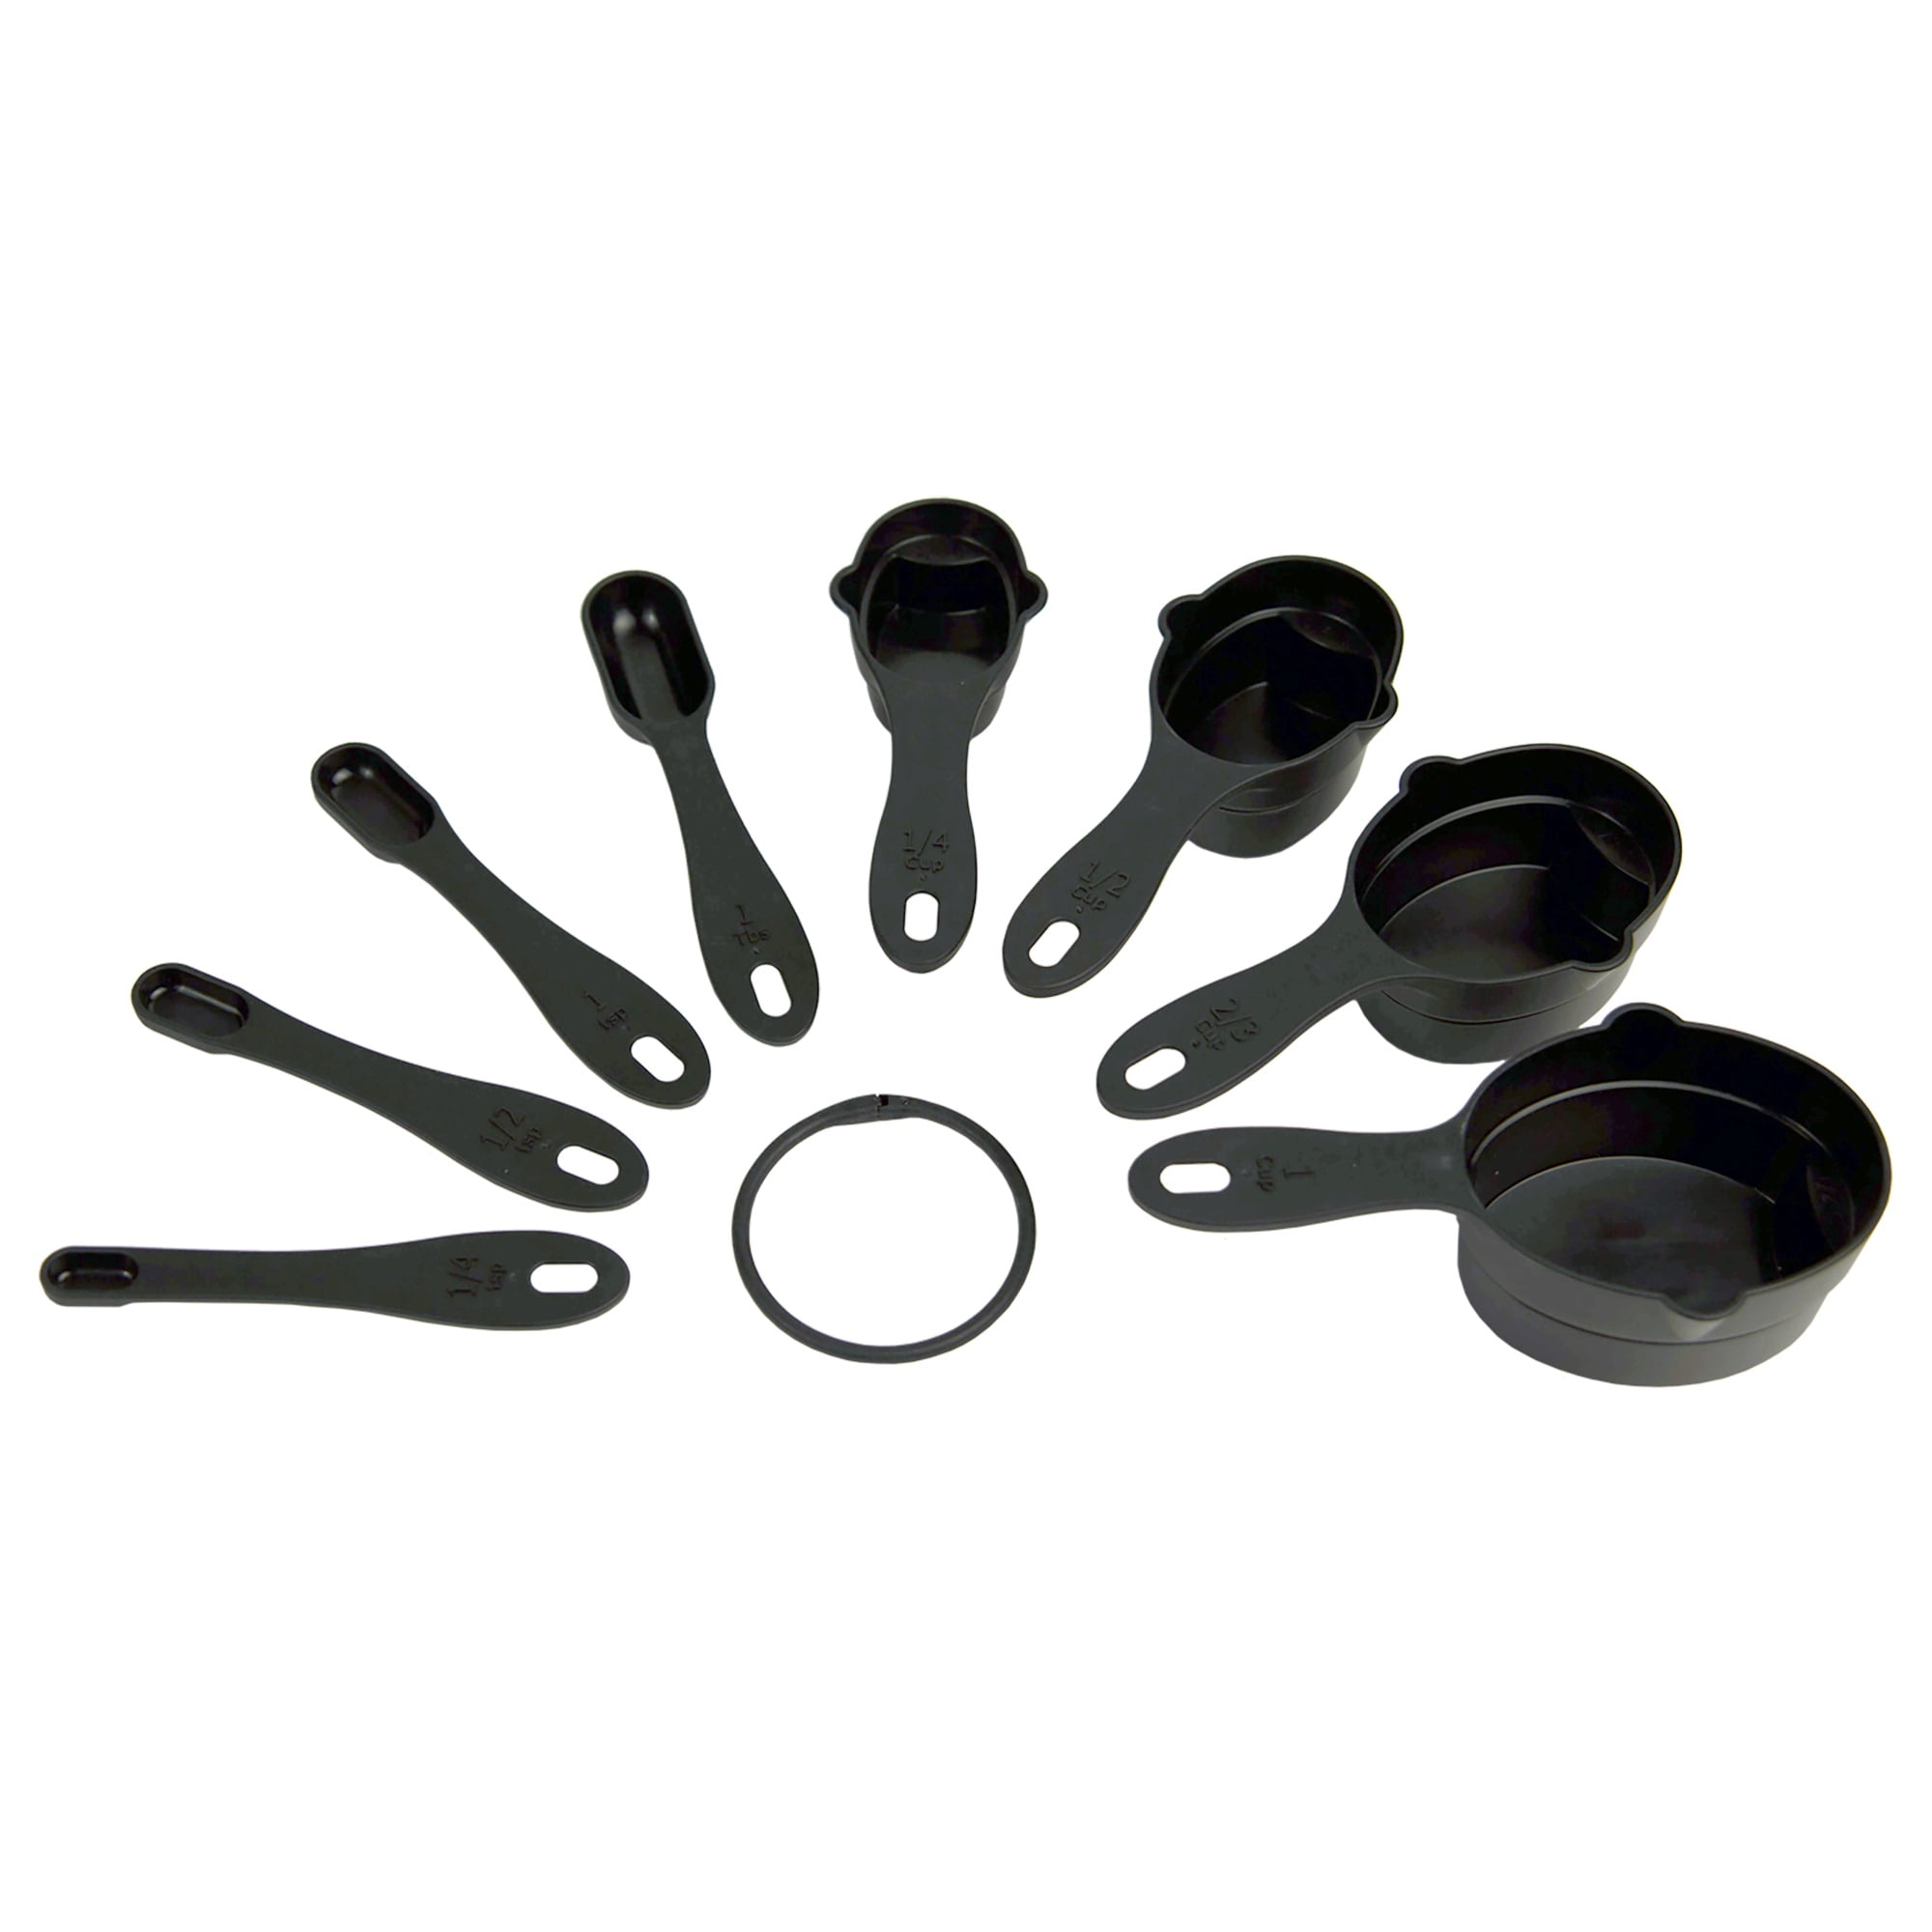 Measuring cup and spoon set, Stainless steel with durable powder coating in  Black, plus attached with black leather